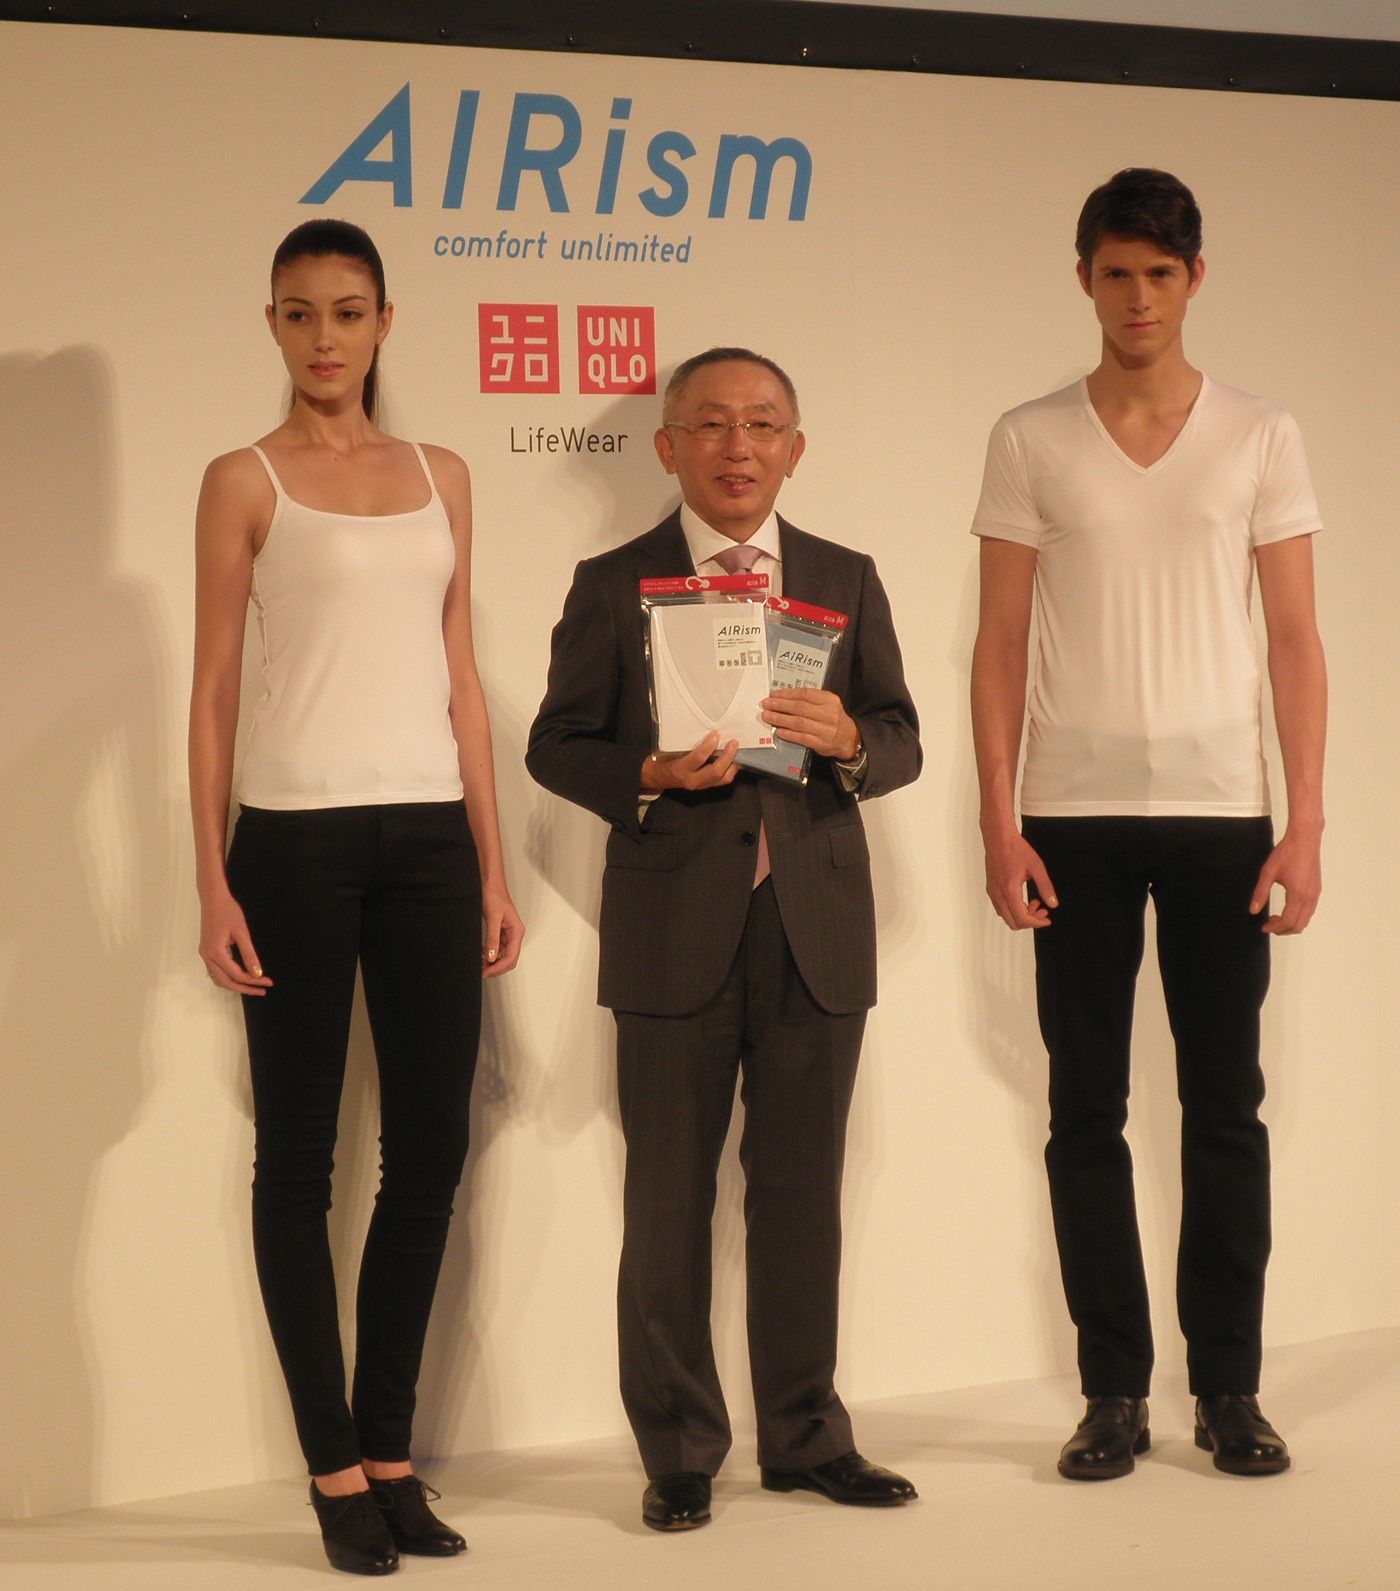 UNIQLO launches AIRism as a strategic global brand - Japan Today